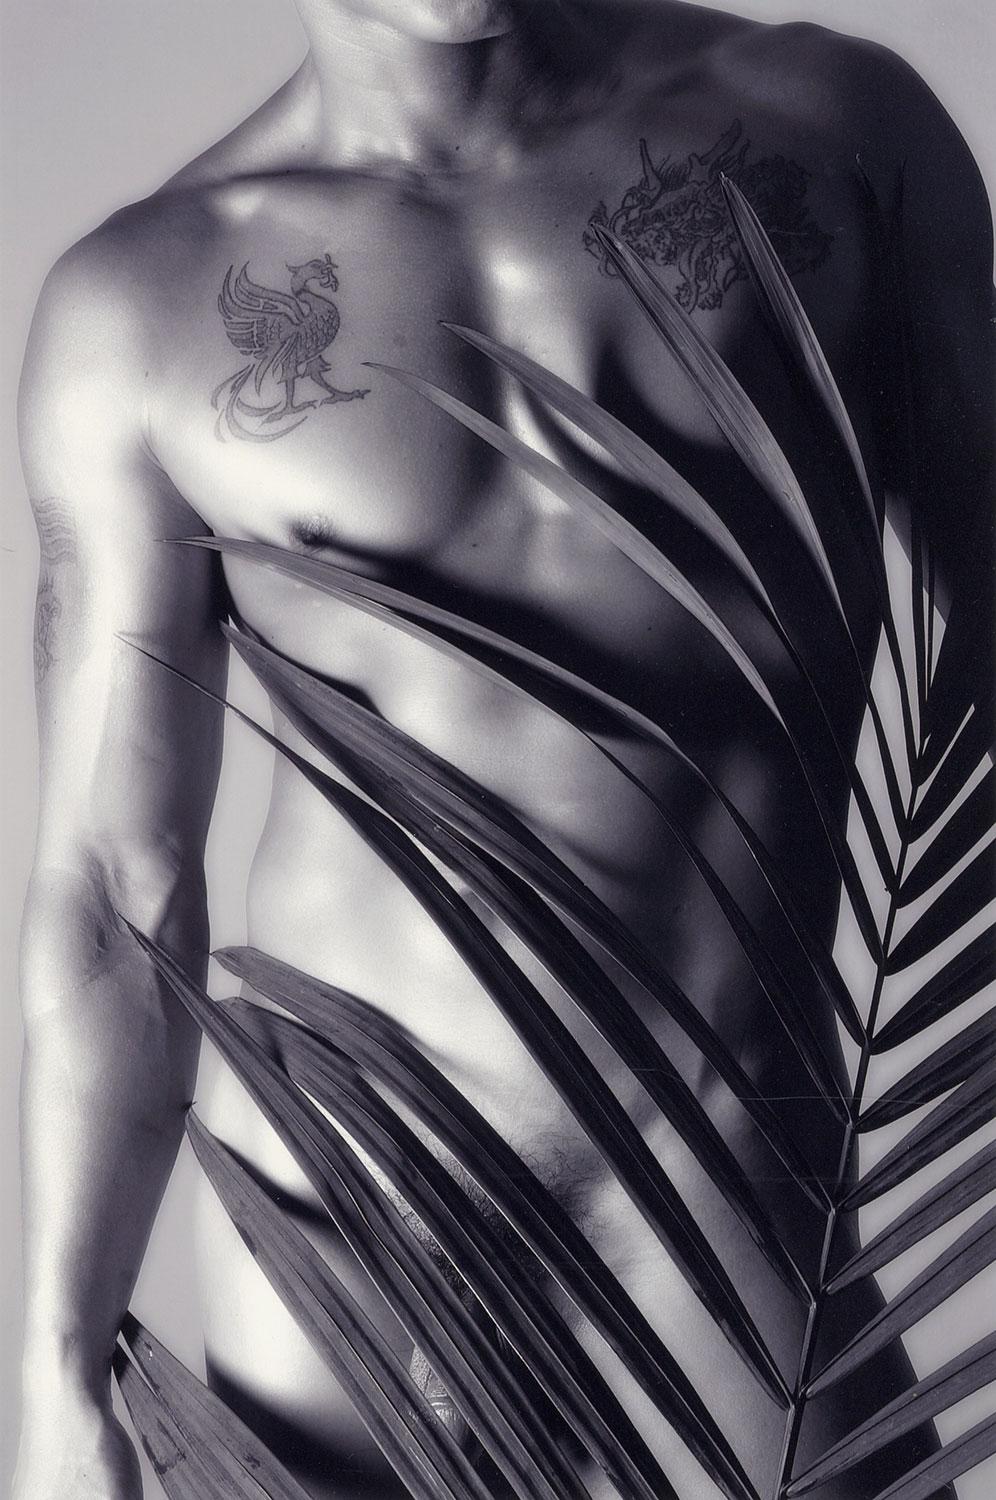 Dylan Ricci Nude Photograph - Male Nude 23 (full frontal nude tattooed male and fern creating pattern on body)